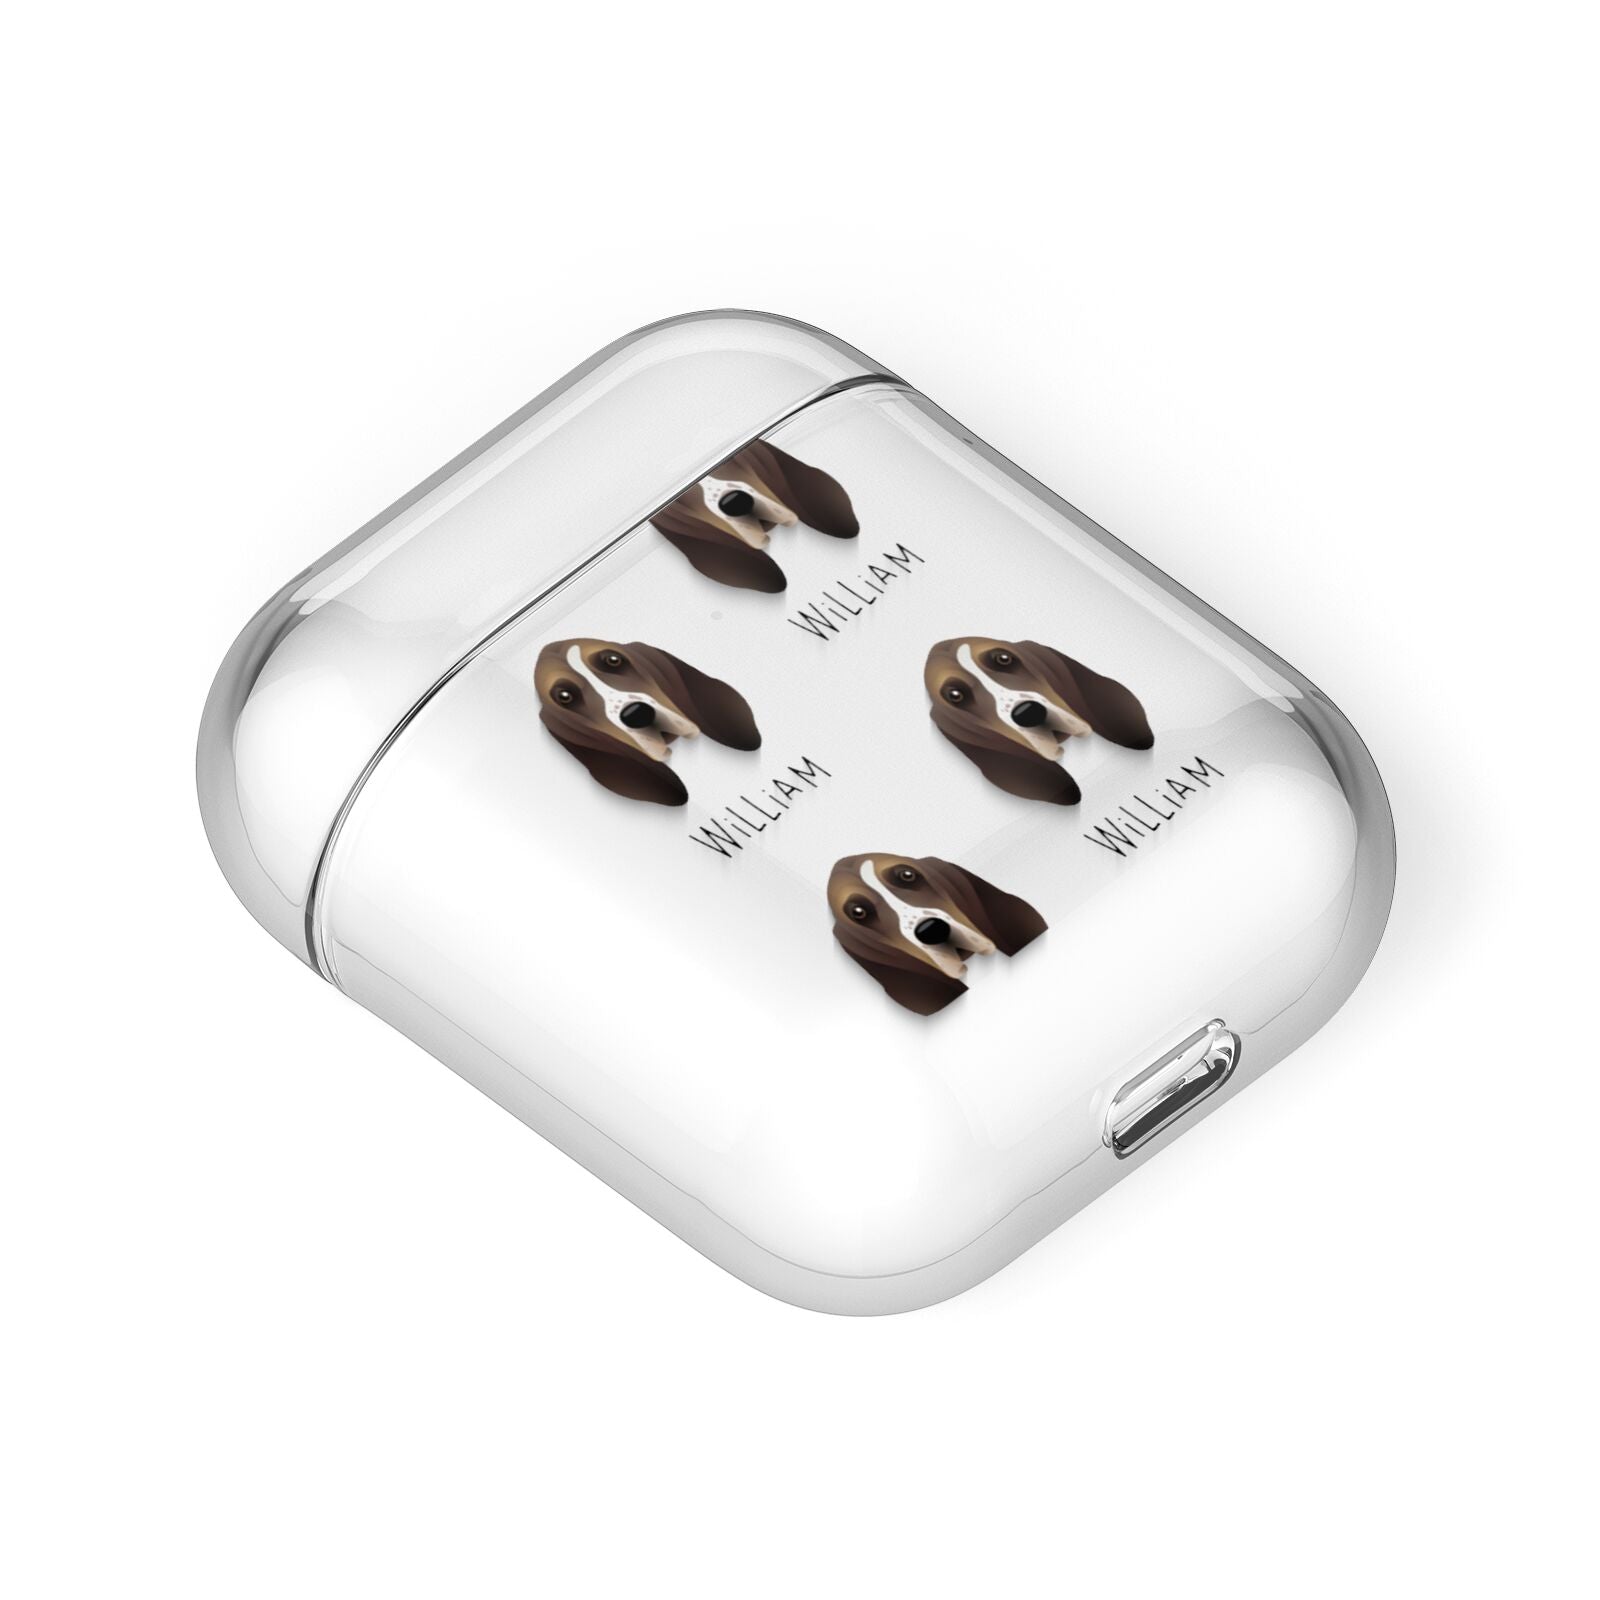 Basset Hound Icon with Name AirPods Case Laid Flat